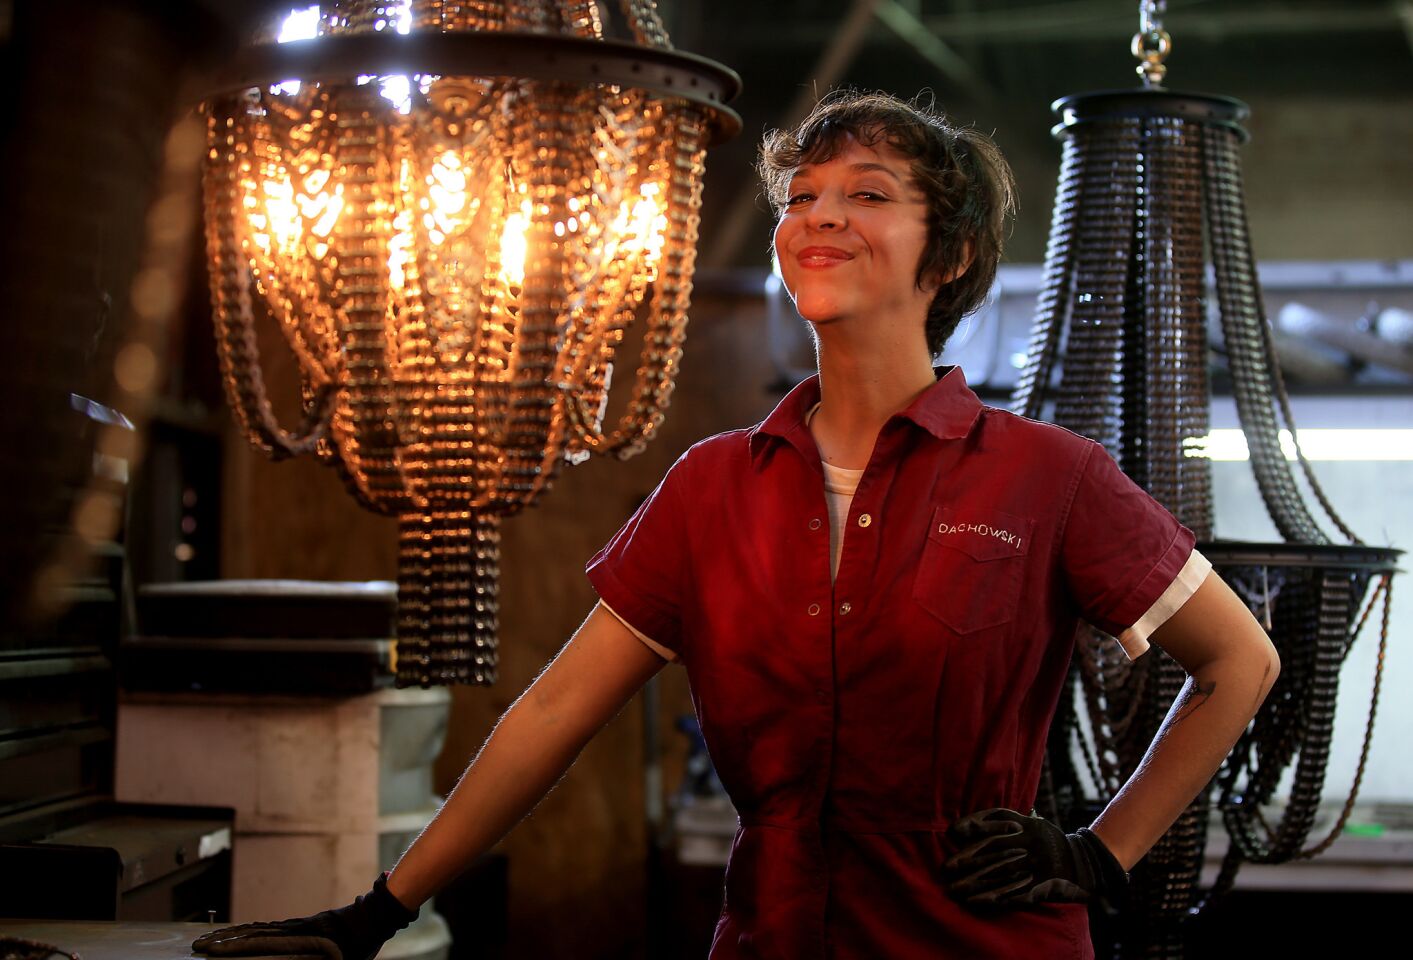 Artist Carolina Fontoura Alzaga makes chandeliers from old bicycle parts, including chains, sprockets and spoked wheels. Her company, Facaro, ships the custom-made light fixtures all over the world.